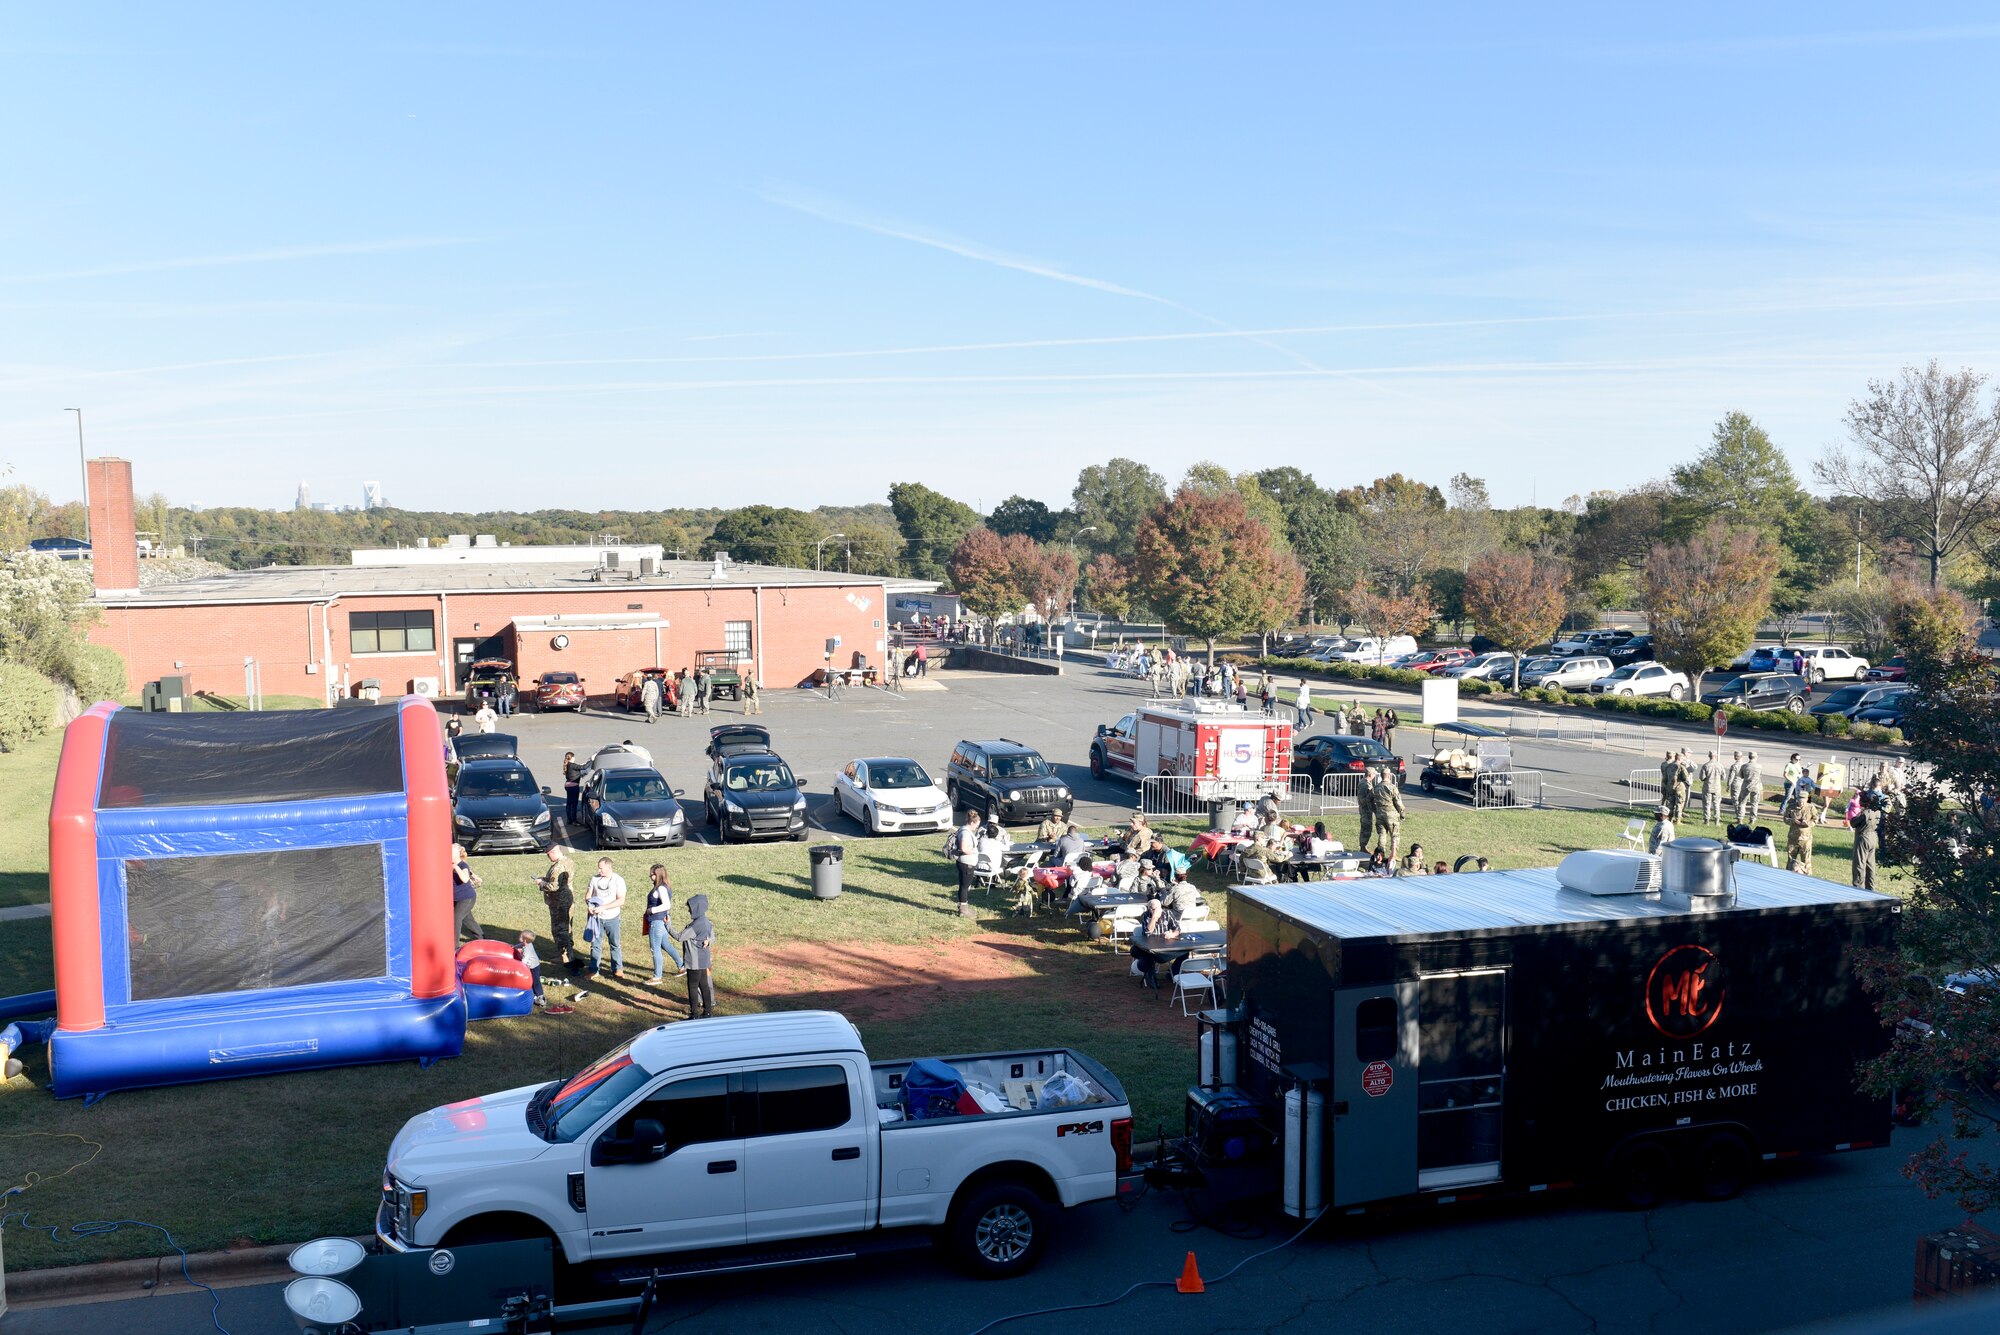 Families and members of the North Carolina Air National Guard mill around various stations during a Fall Festival put together by the Junior Enlisted Council (JEC) at the North Carolina Air National Guard (NCANG) Base, Charlotte Douglas International Airport, Nov. 2, 2019. The Fall Festival is a first-time event for the JEC and NCANG that is hoped to be held for years to come.